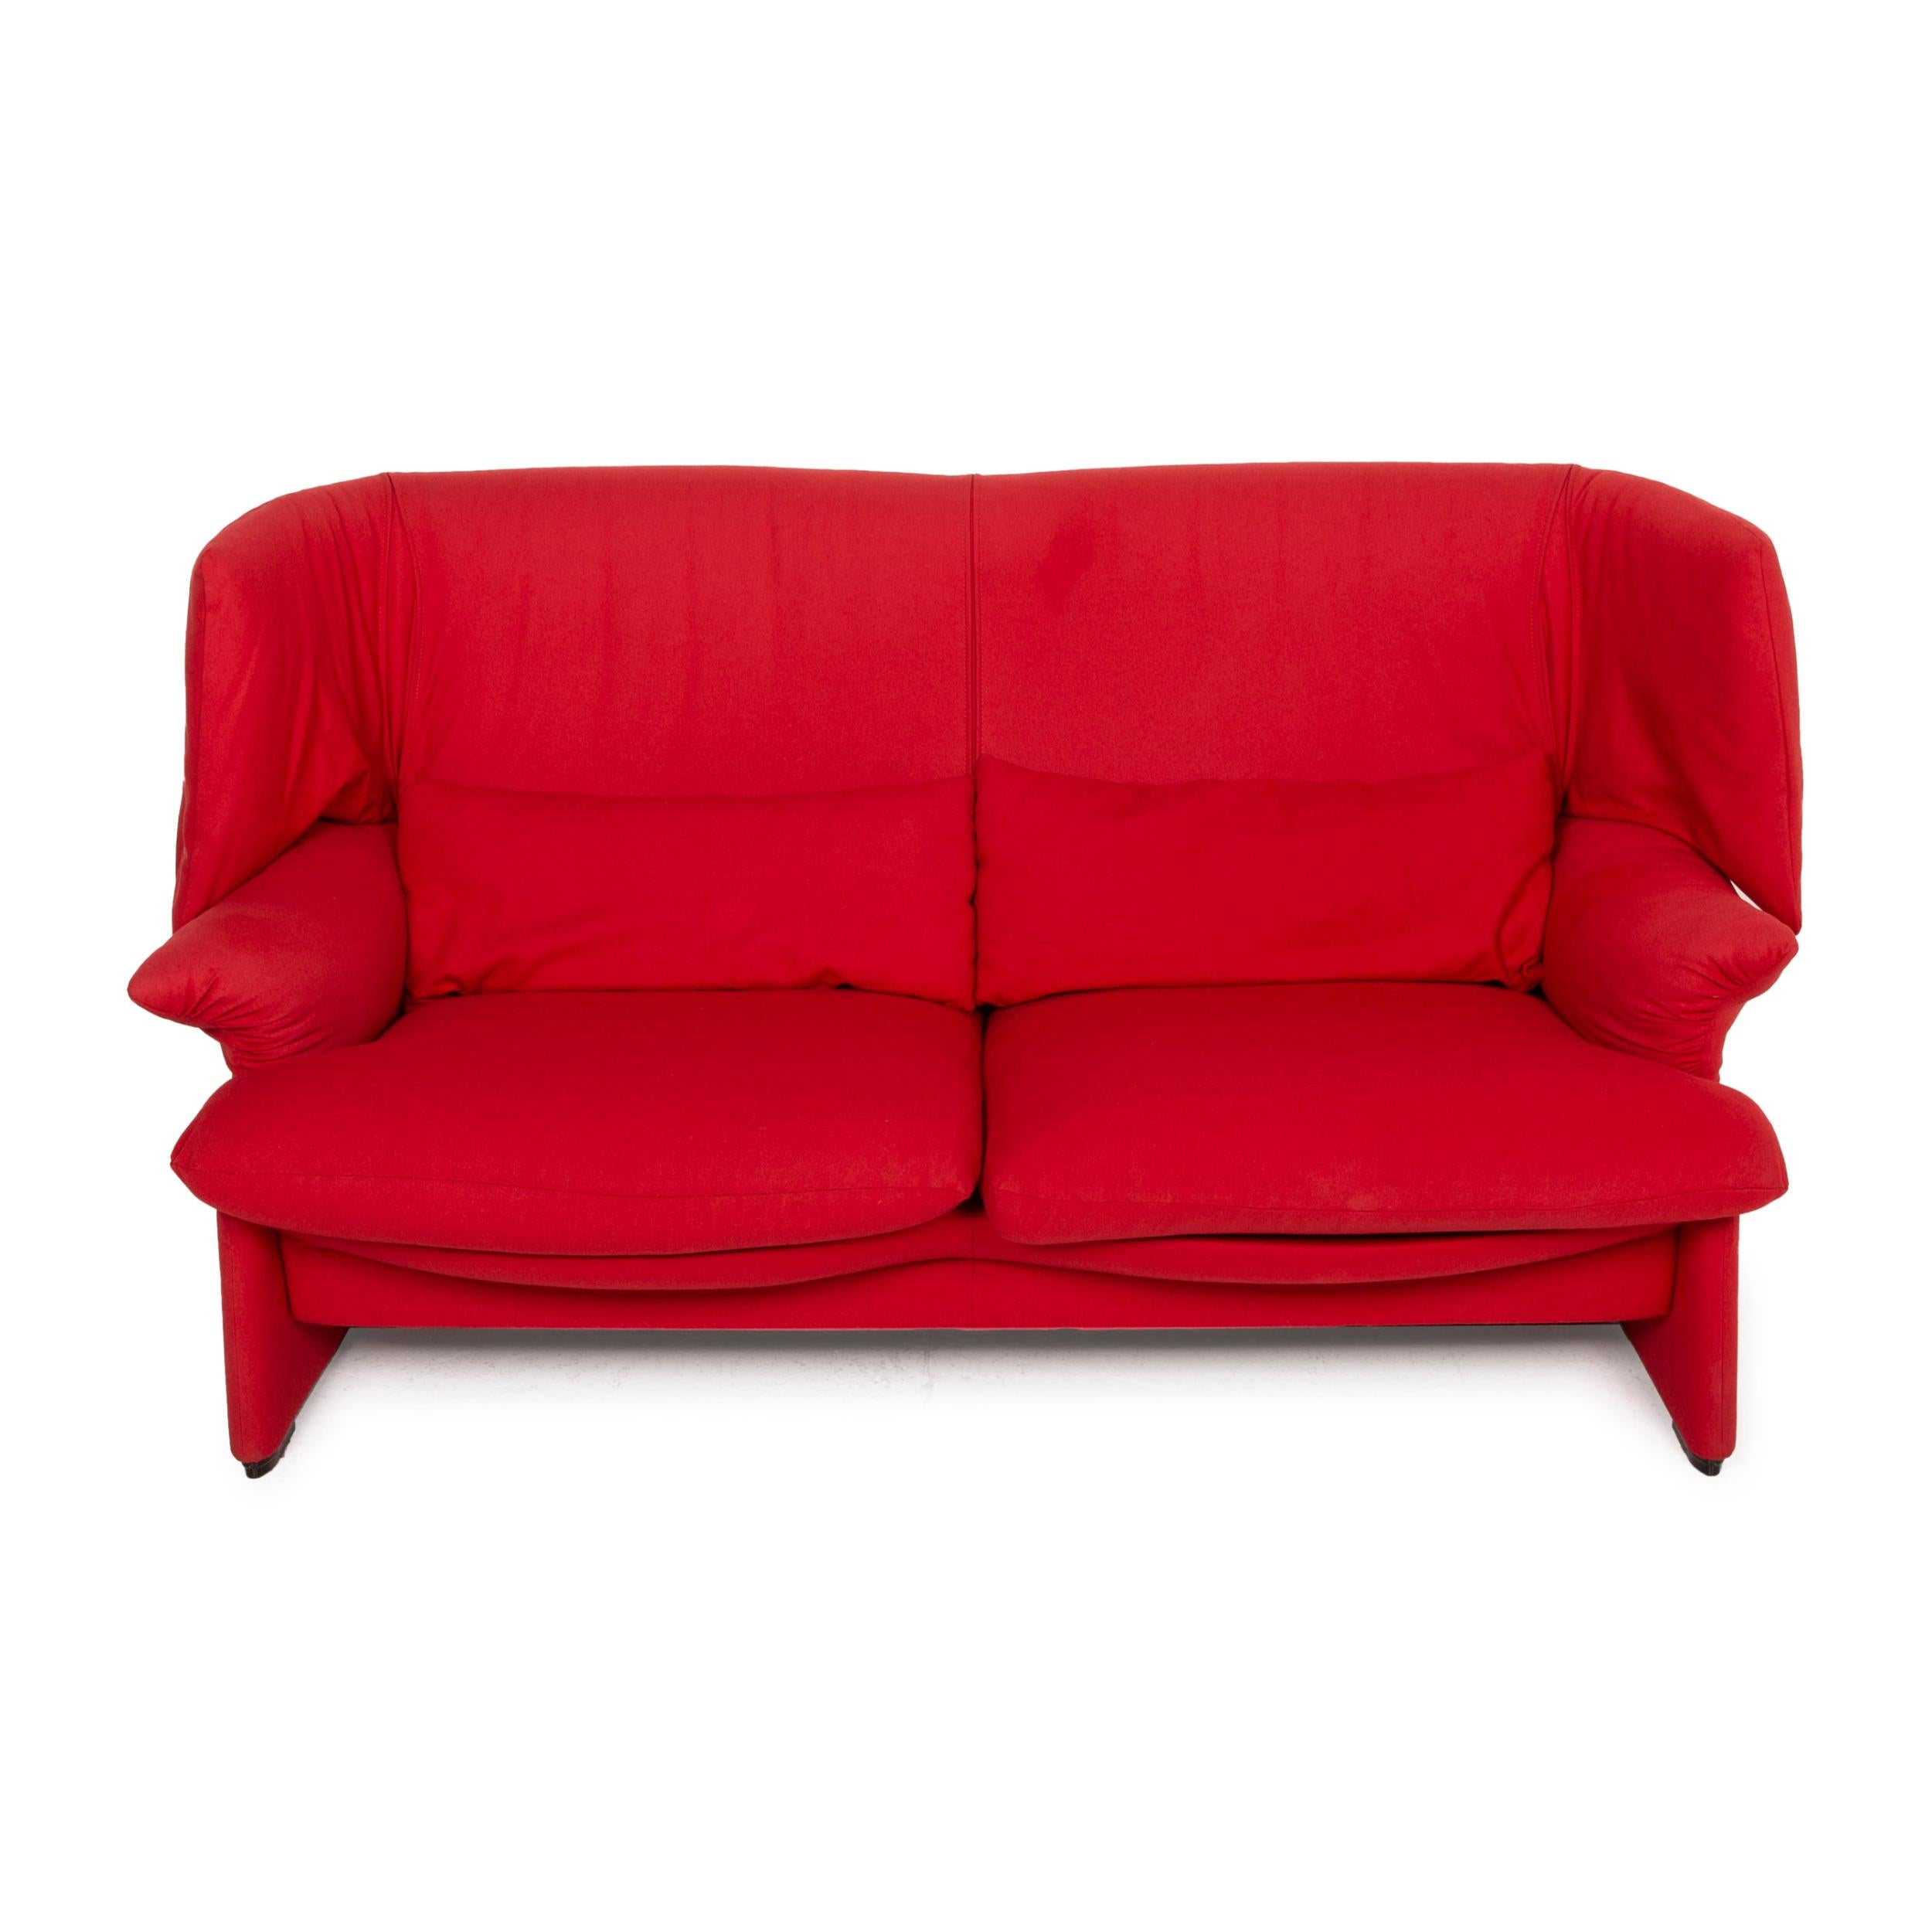 Contemporary Cassina Maralunga Fabric Sofa Red Two-Seater For Sale